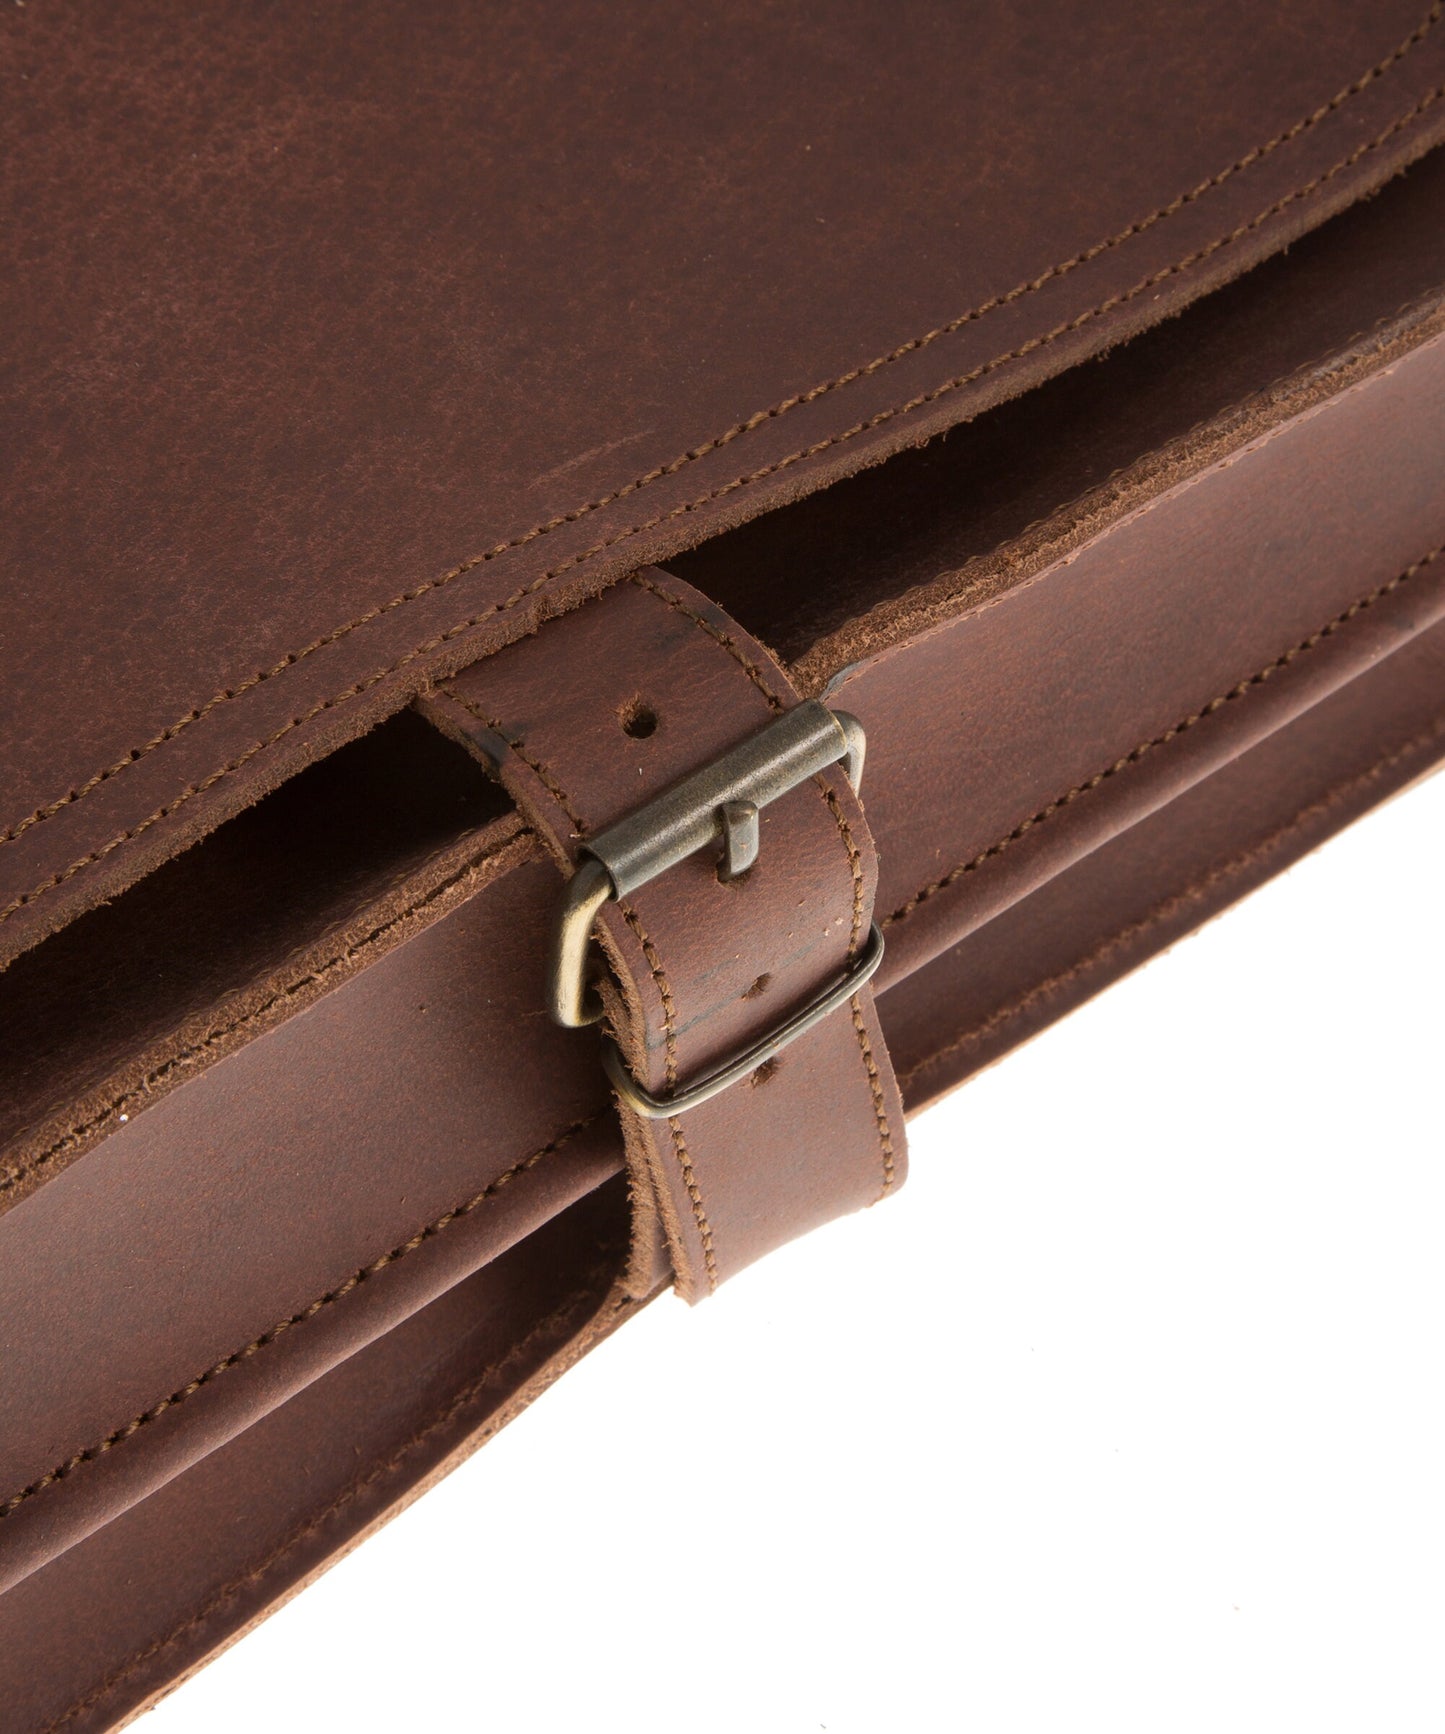 Leather messenger bag men, Leather laptop bag, Leather briefcase, Leather accessories for men